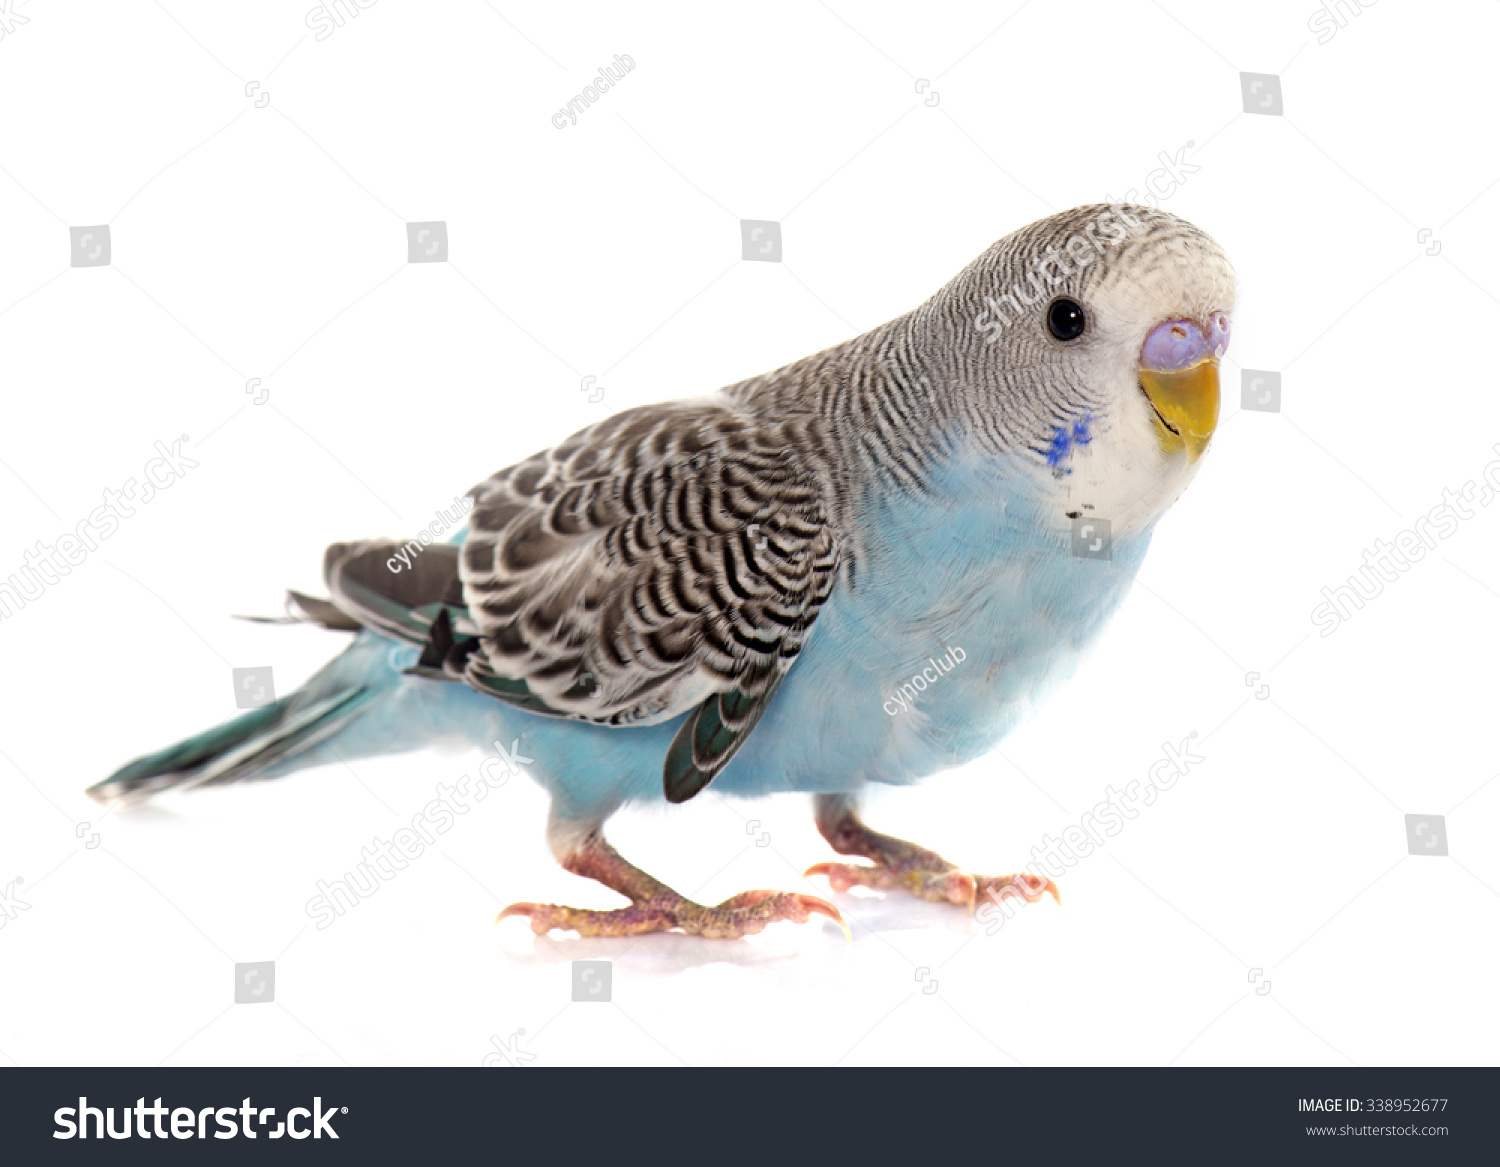 common pet parakeet in front of white background #338952677